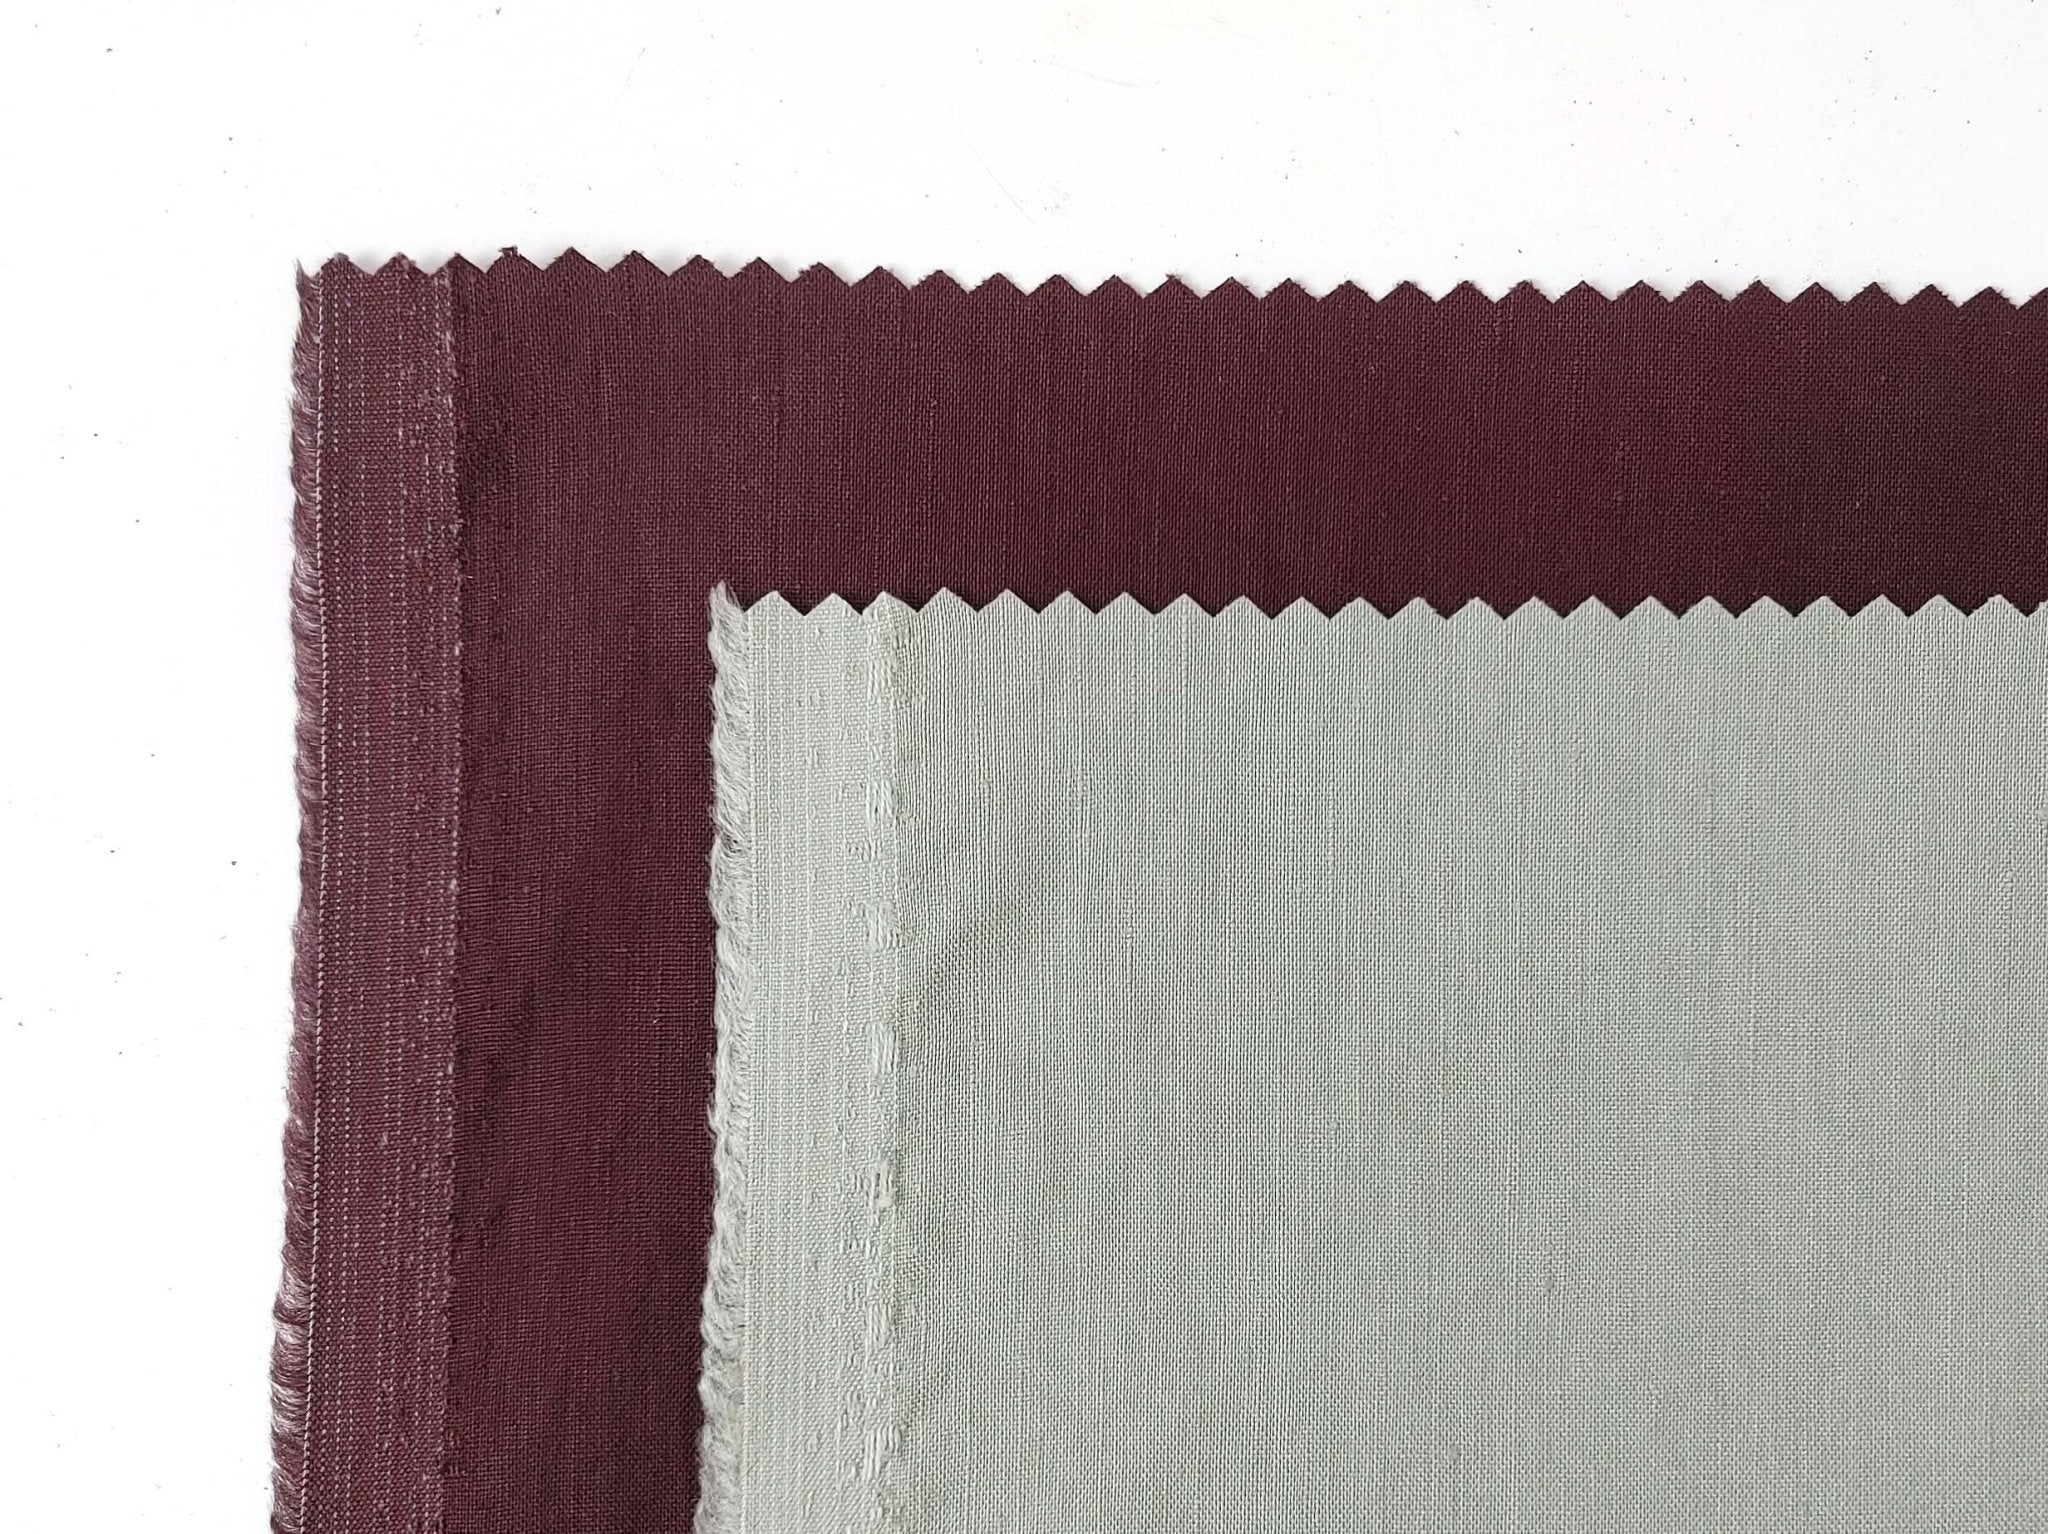 Medium Weight Linen Rayon Stretch Fabric - Versatile Material for Crafting and Apparel 6888 6889 - The Linen Lab - Brown